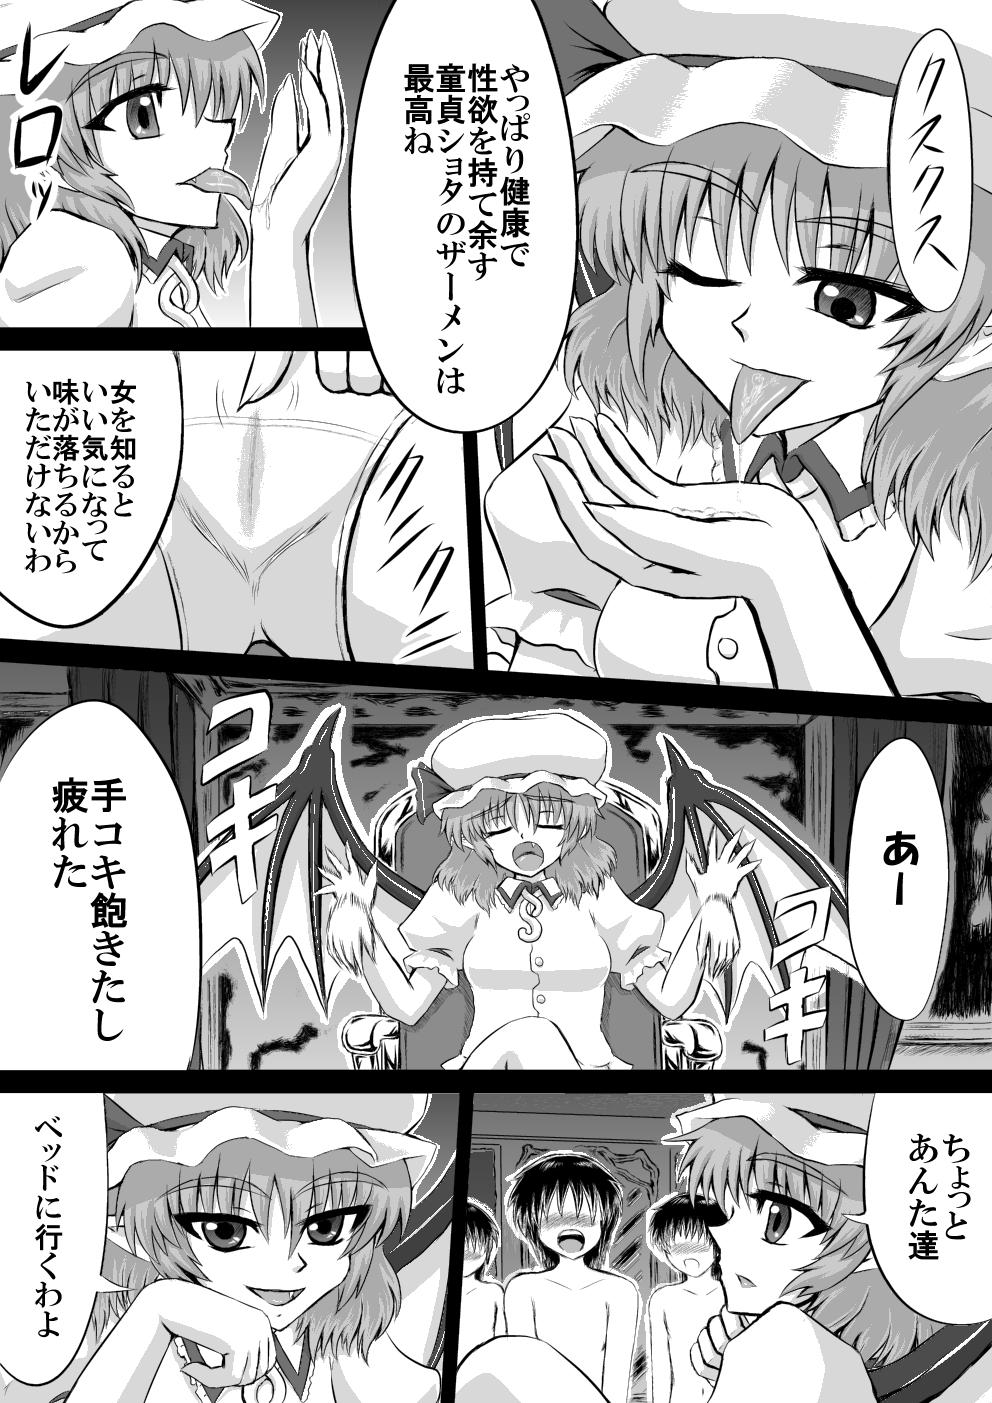 Peluda Milk Server Made in SDM - Touhou project Uncensored - Page 3